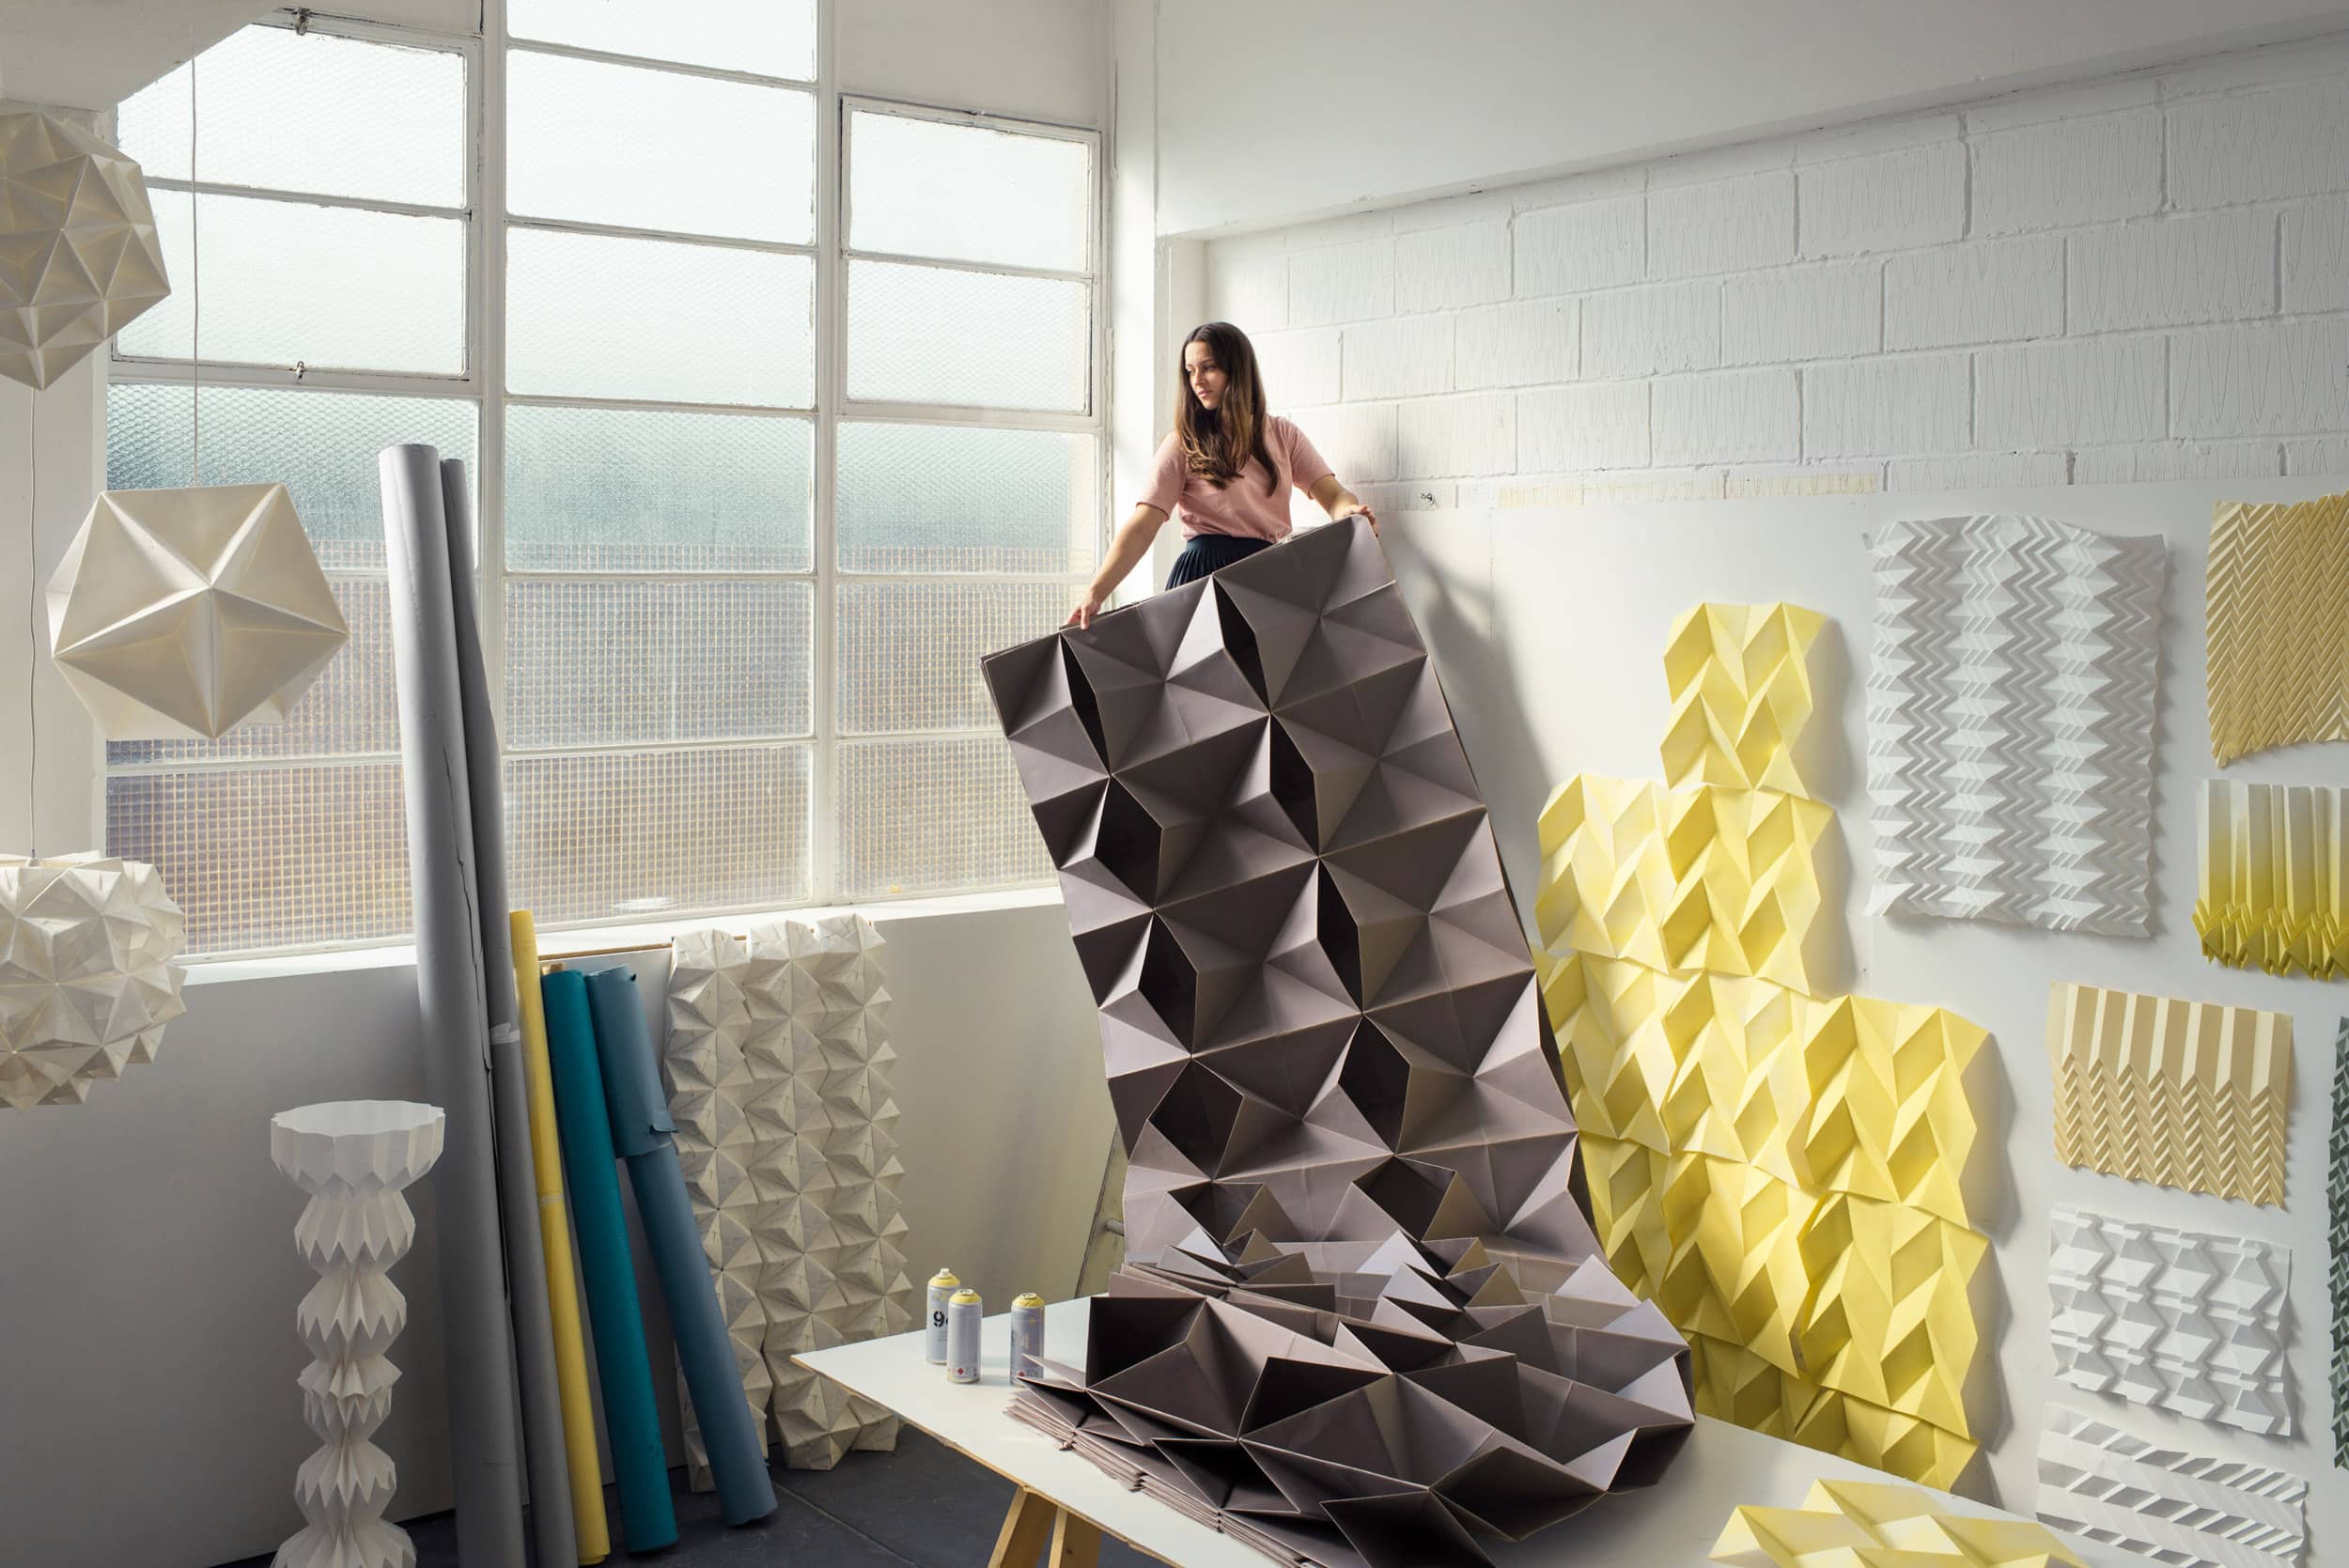 Origami artist, Kyla McCallum of Foldability photographed in her studio, East London for San Miguel rich list 2017 and Evening Standard.